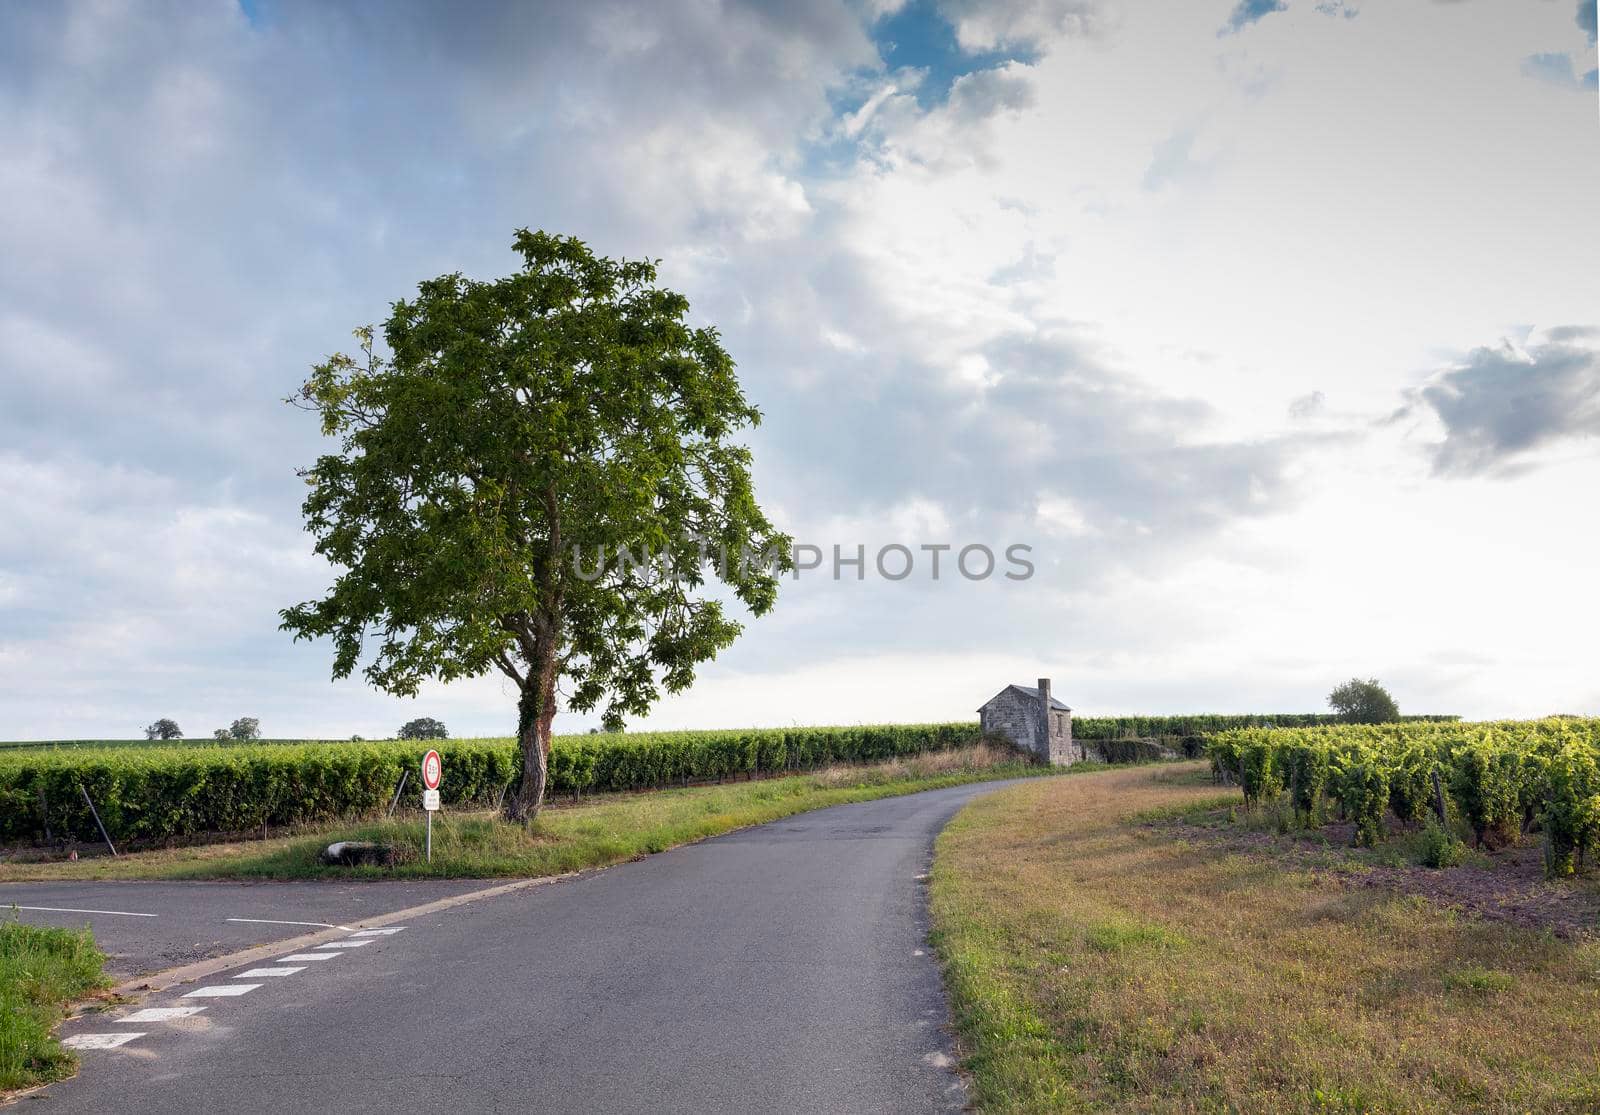 vineyards and old stone walls in Parc naturel regional Loire-Anjou-Touraine near river loire in france by ahavelaar